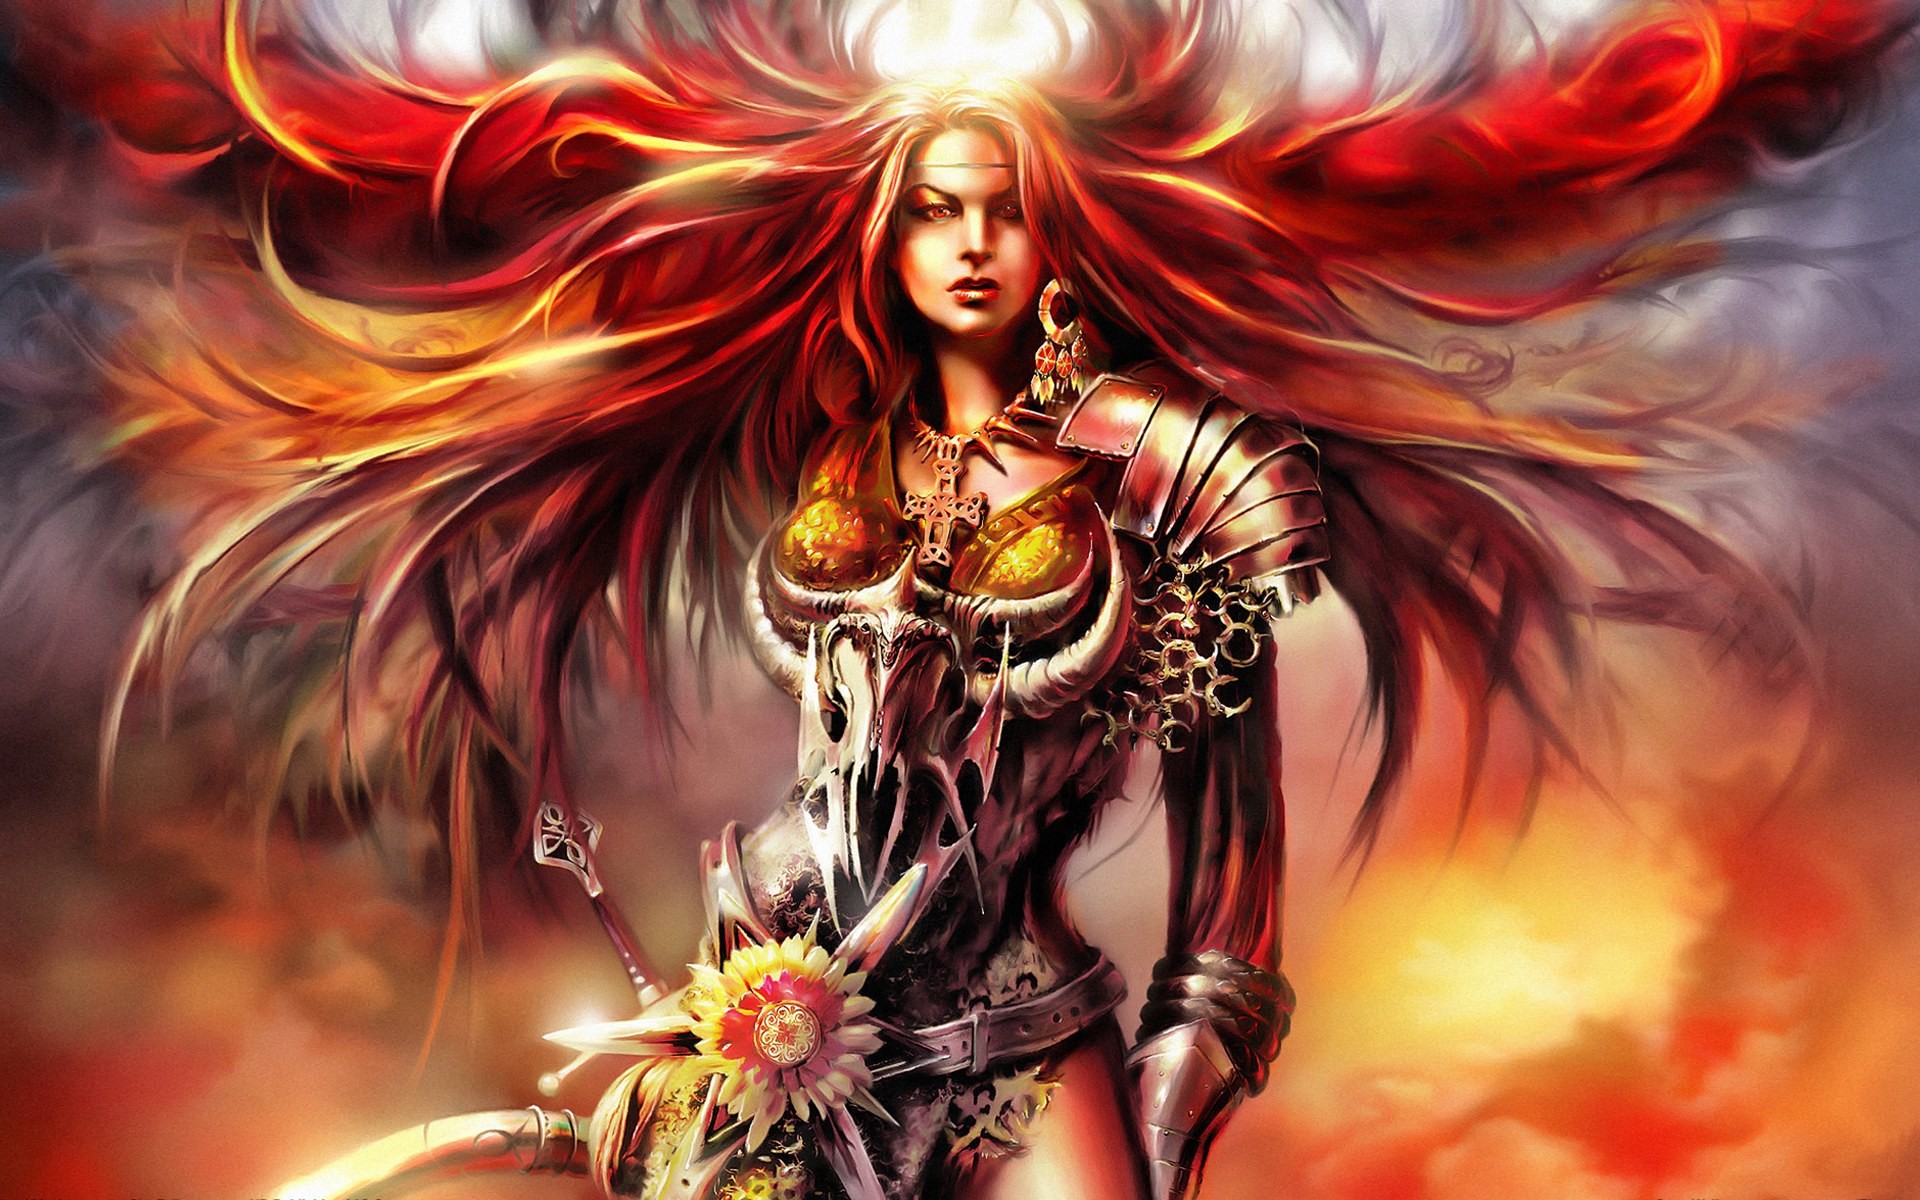 1920x1200 Fantasy images Fabtasy Warrior Girl HD wallpaper and background photos